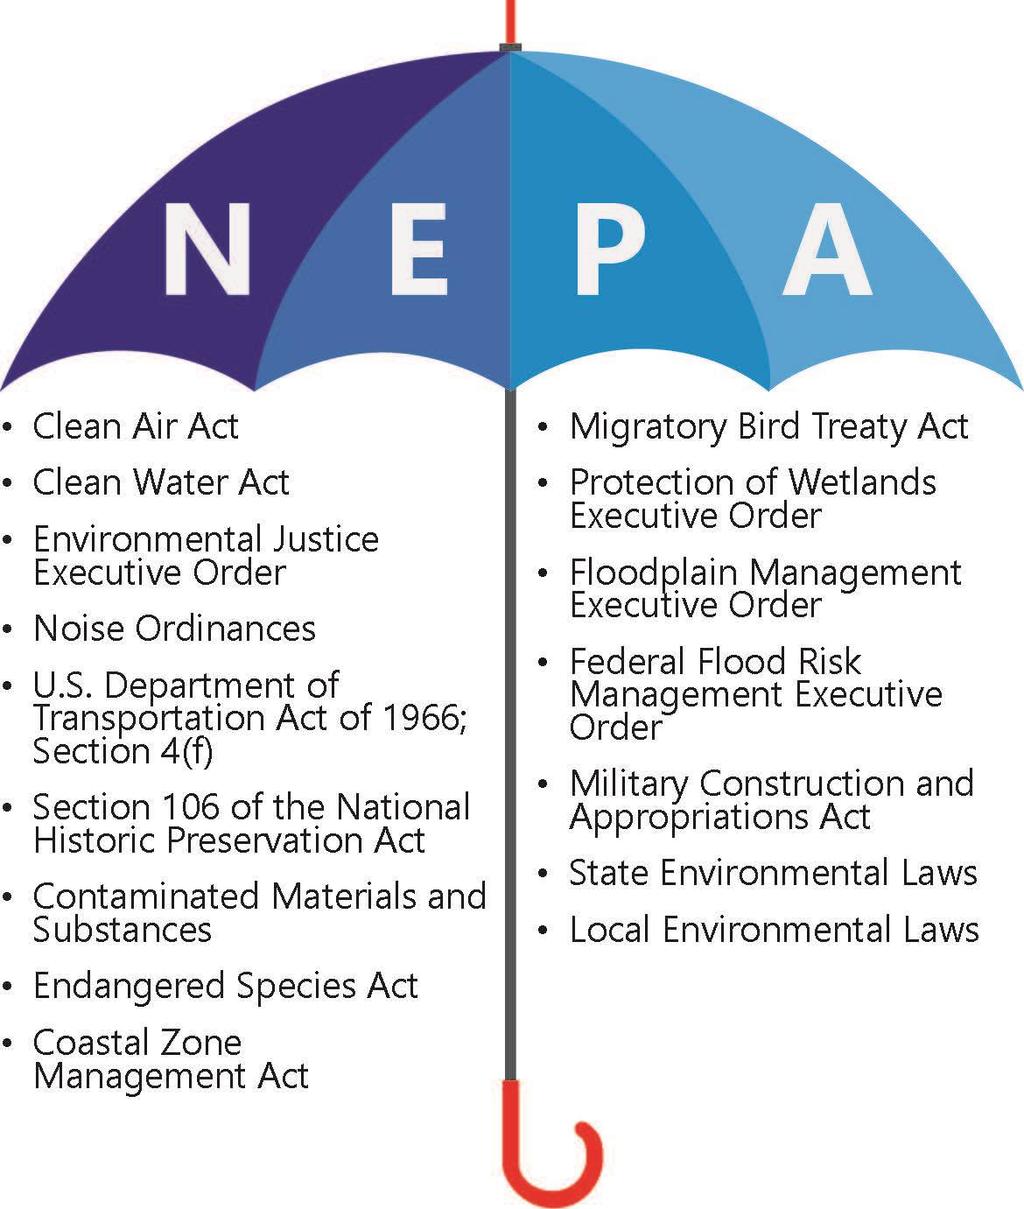 What is NEPA? The National Environmental Policy Act of 1969 (NEPA) requires Federal agencies to assess the environmental effects of their proposed actions prior to making decisions.